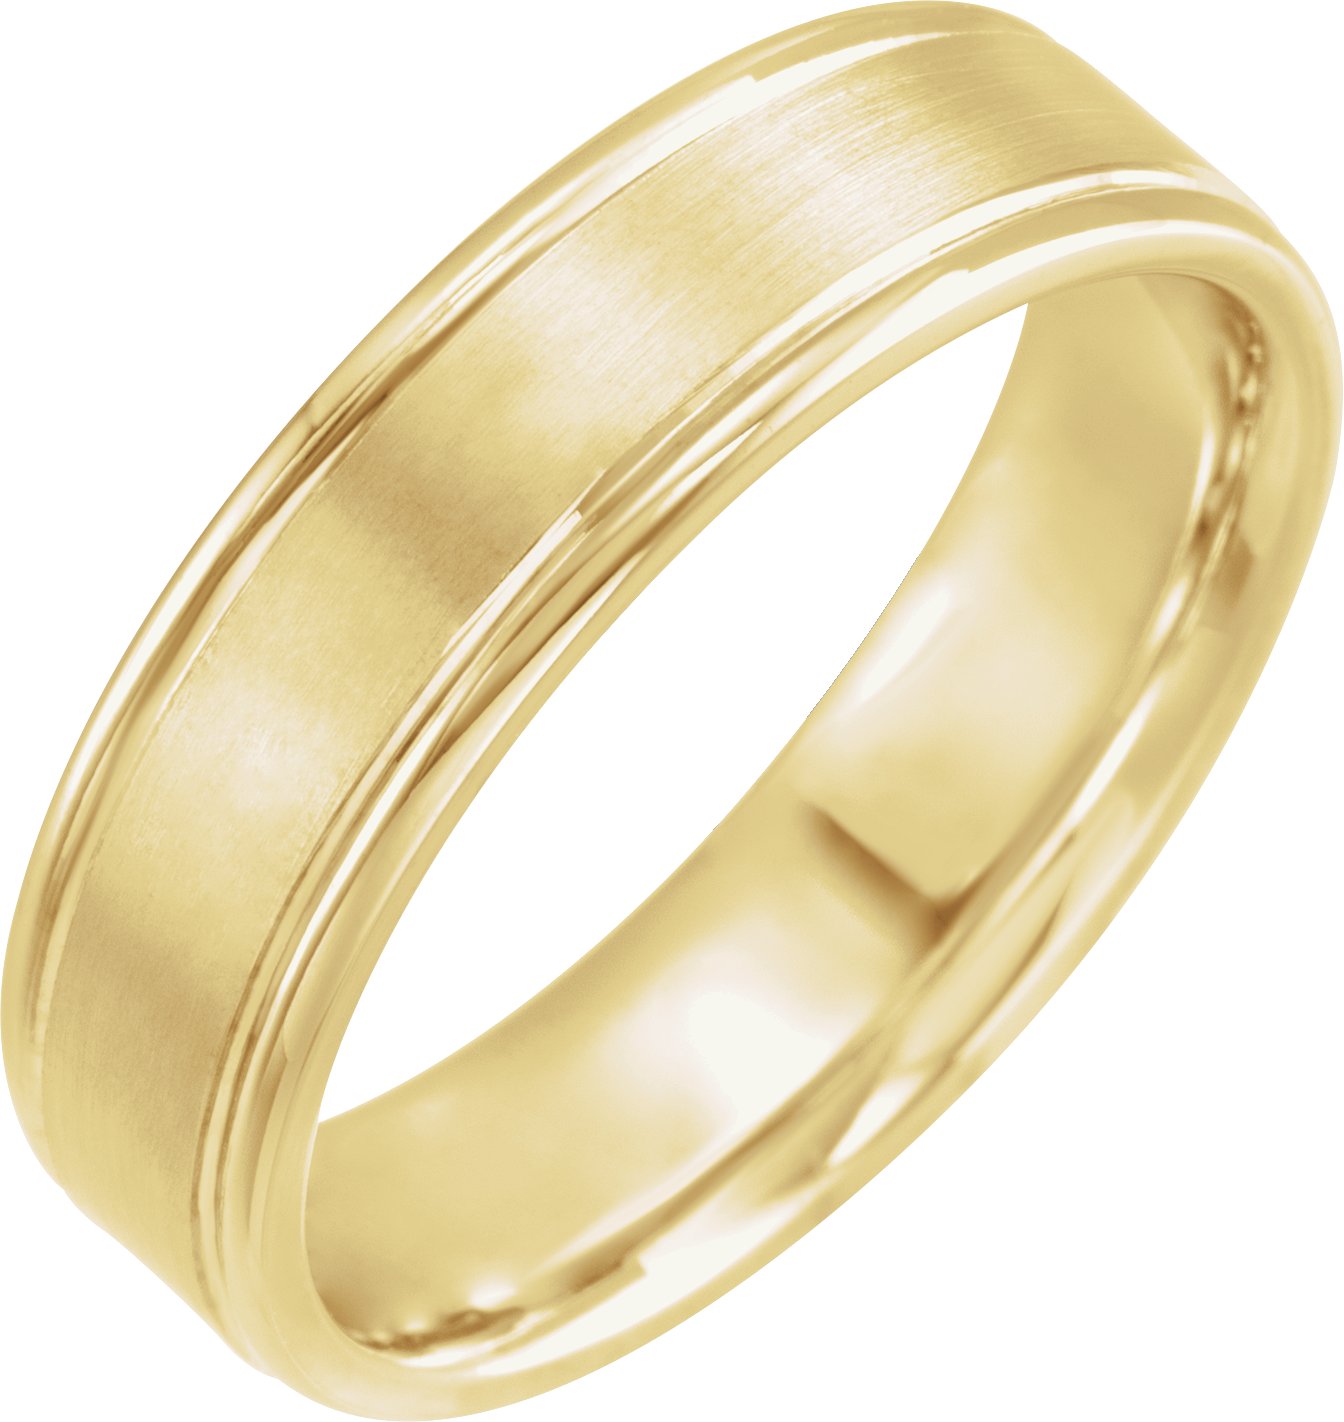 14K Yellow 6 mm Grooved Band Size 10